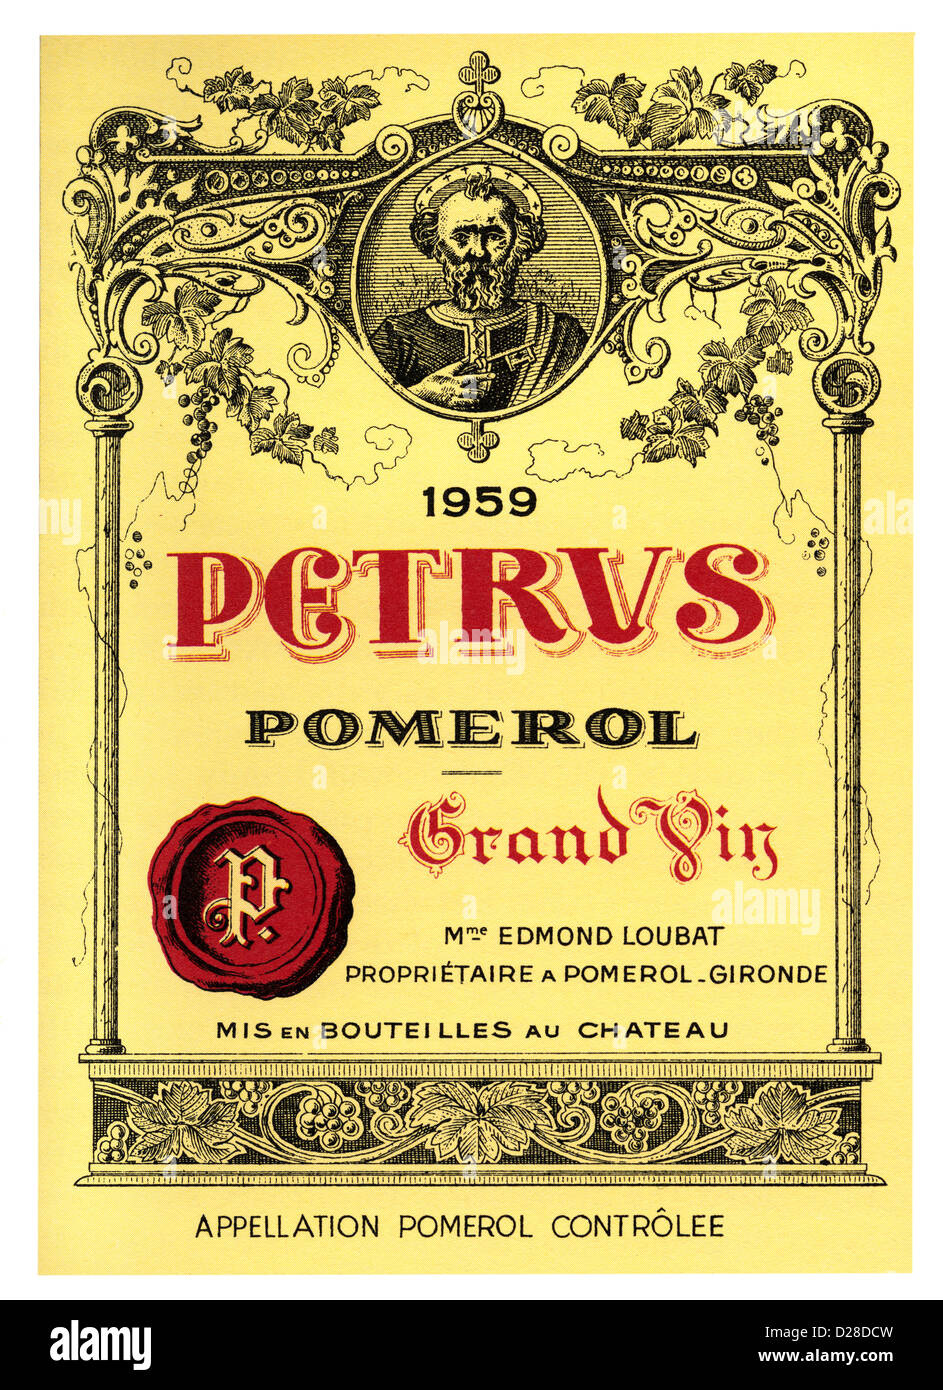 CHATEAU PETRUS Bottle label of outstanding harvest year 1959 Chateau Petrus Pomerol Grand Vin red wine Bordeaux France Stock Photo